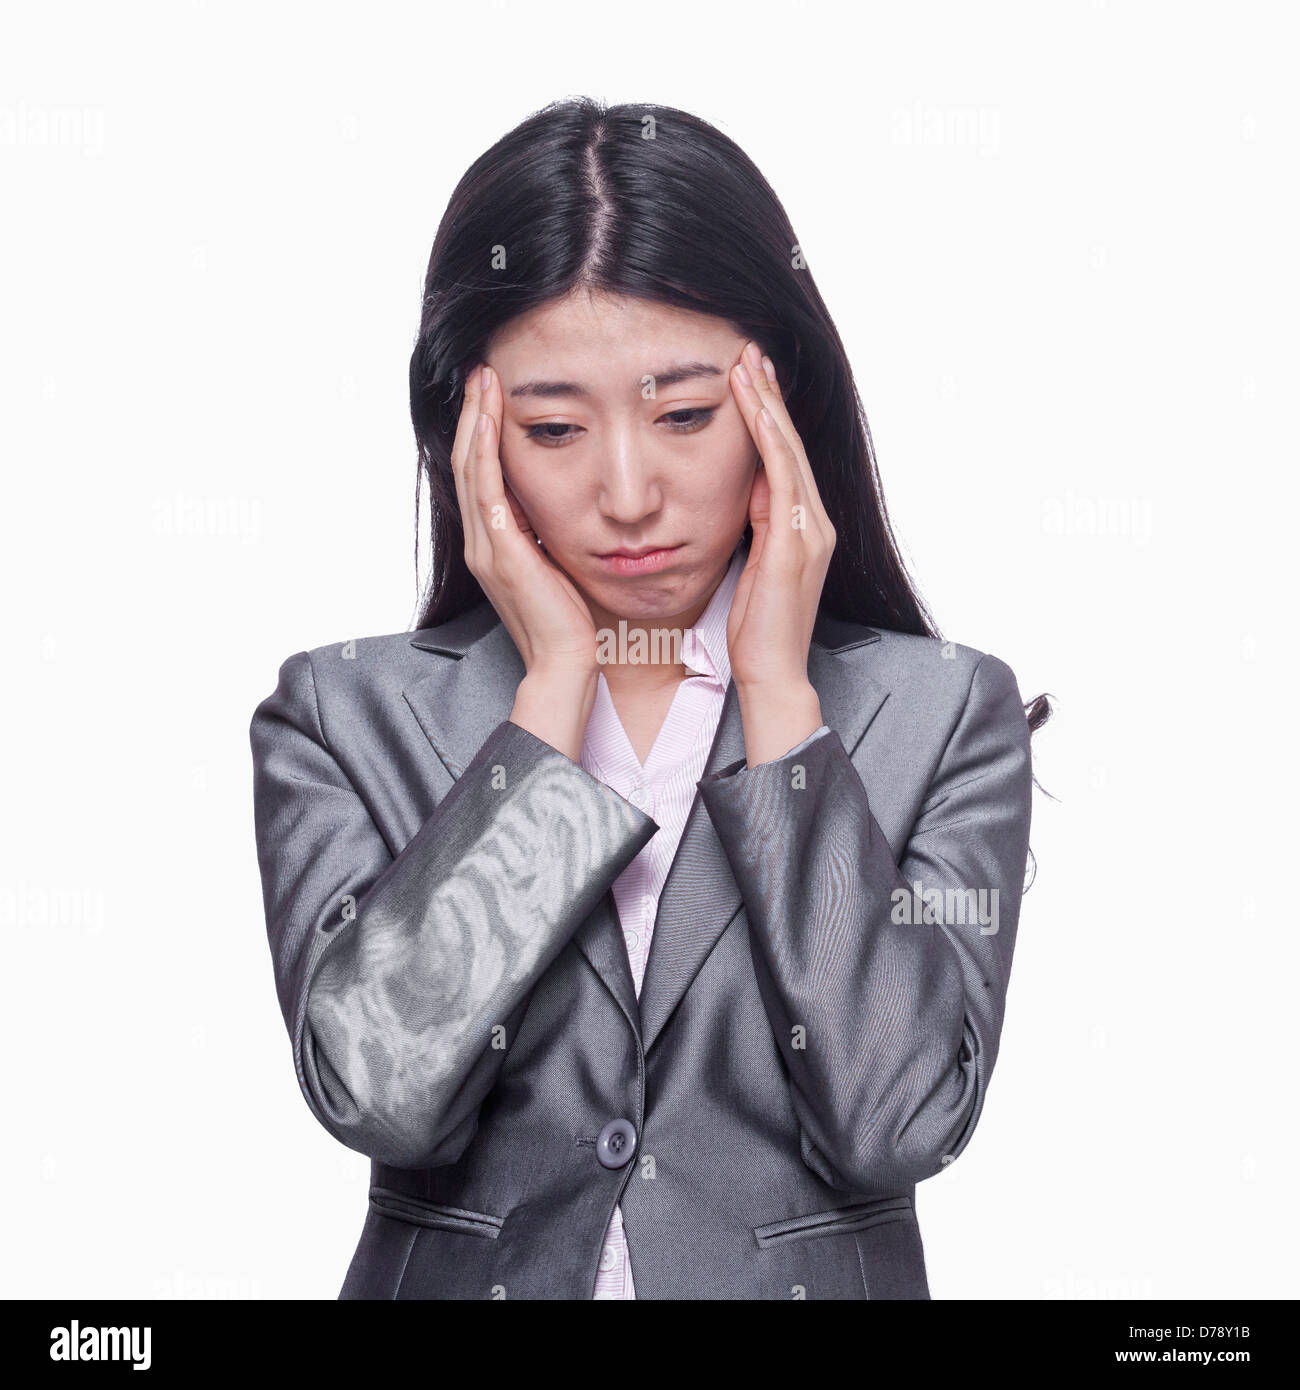 Businesswoman with tired expression Stock Photo